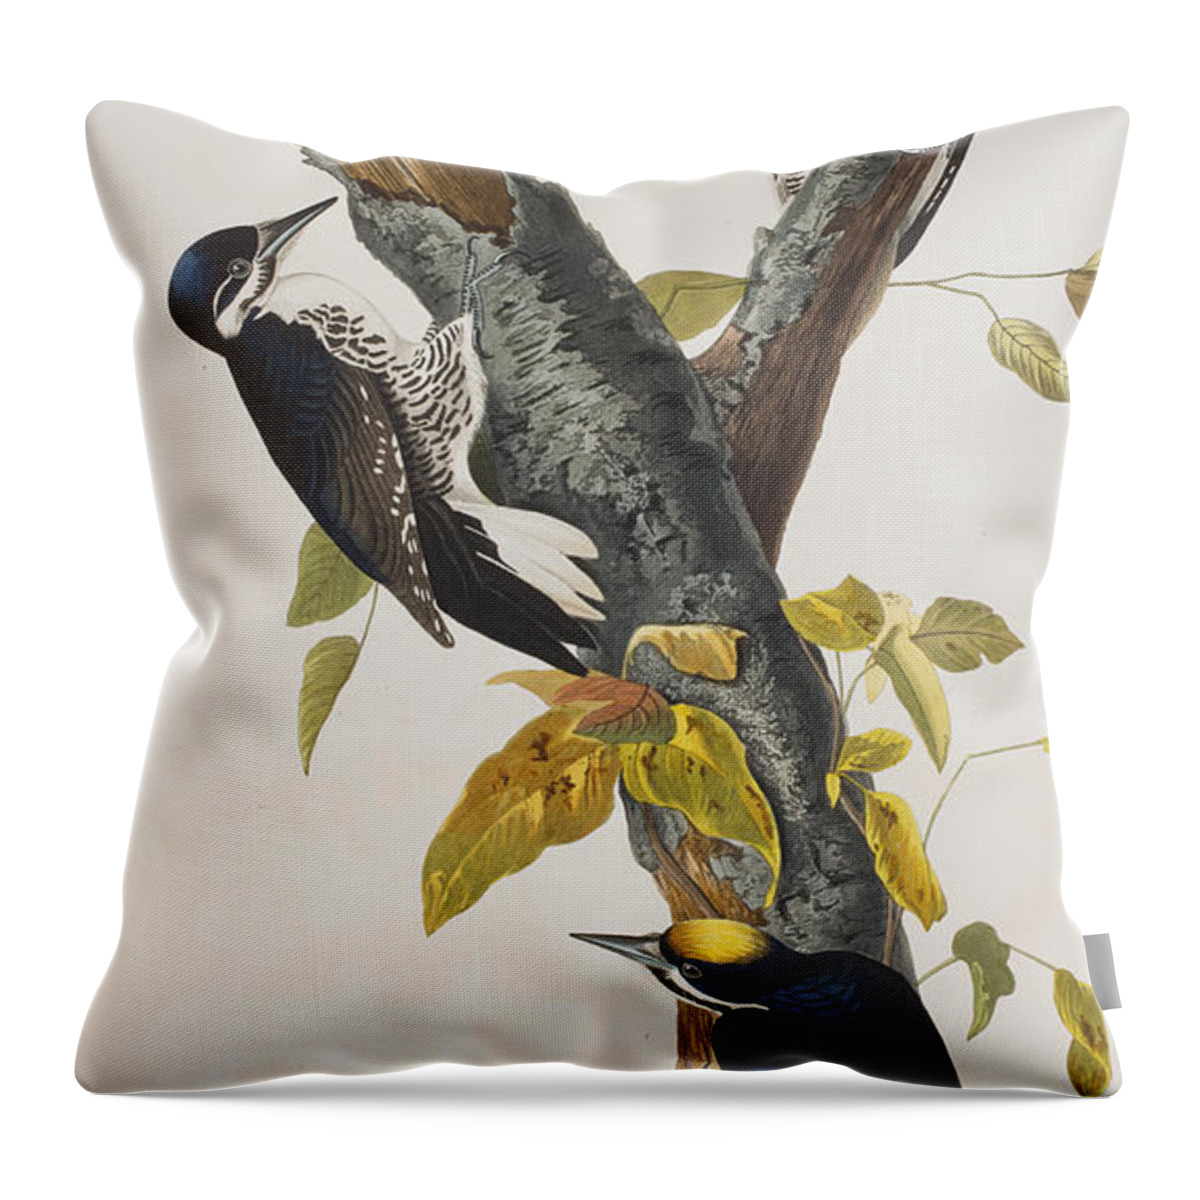 Woodpecker Throw Pillow featuring the painting Three Toed Woodpecker by John James Audubon